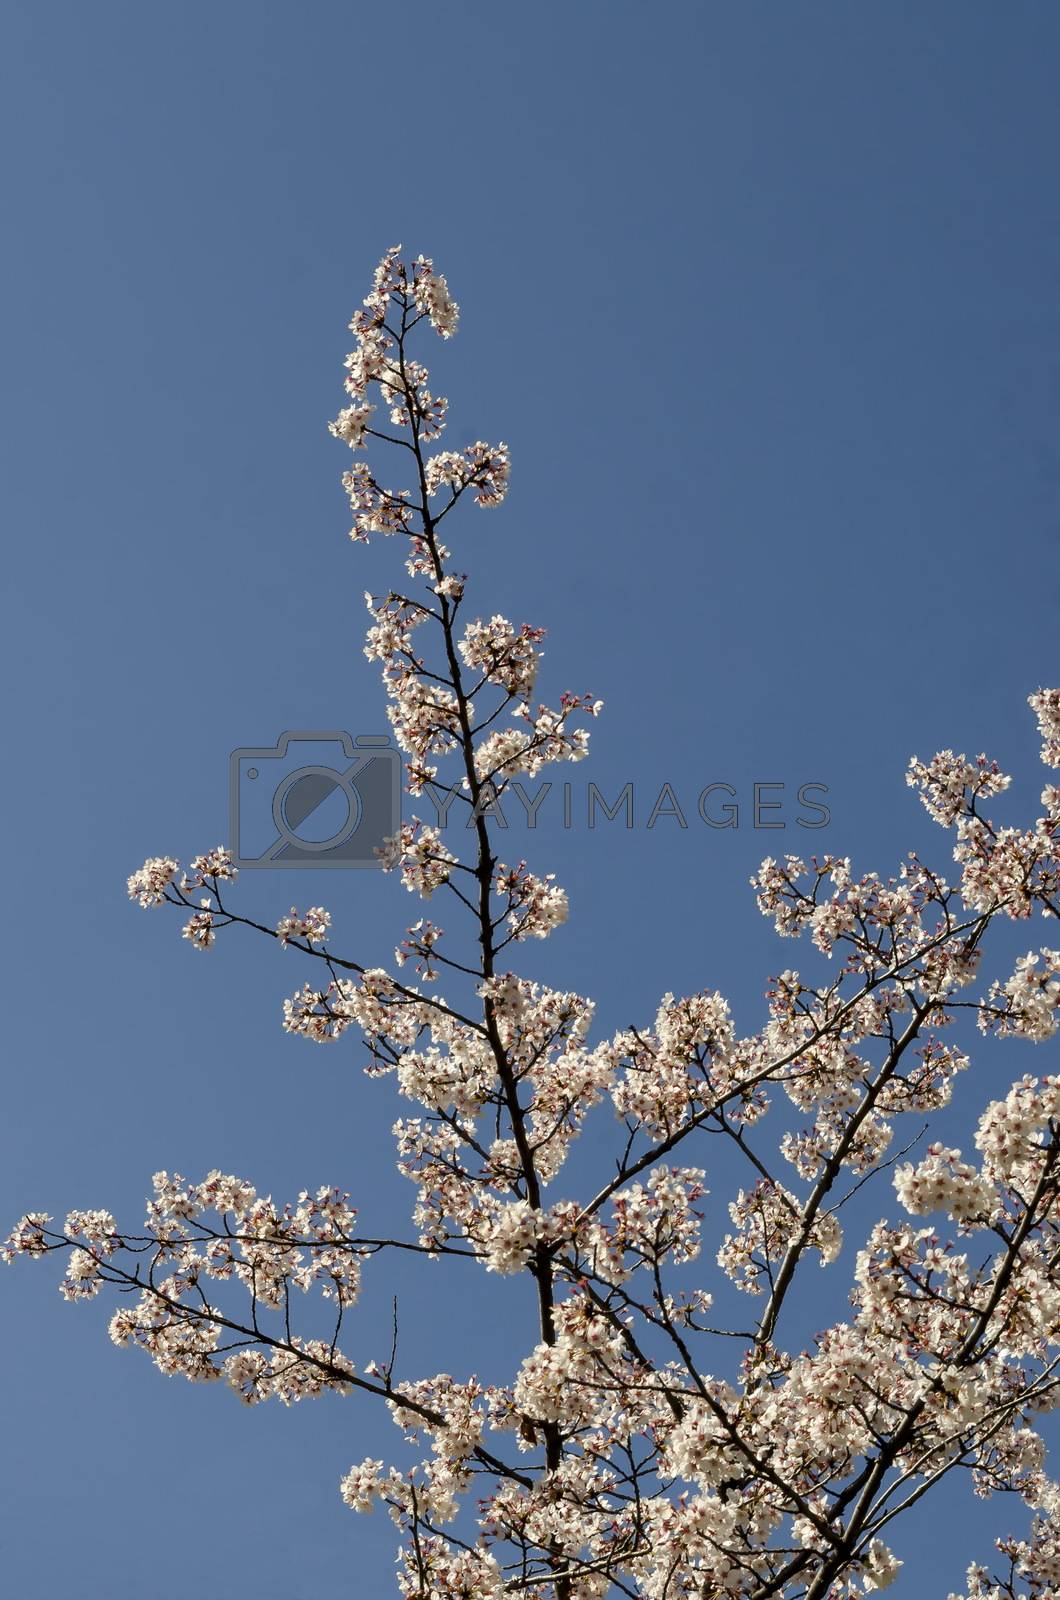 Royalty free image of Blossoming japanese cherry branch, beautiful spring flowers for background by vili45